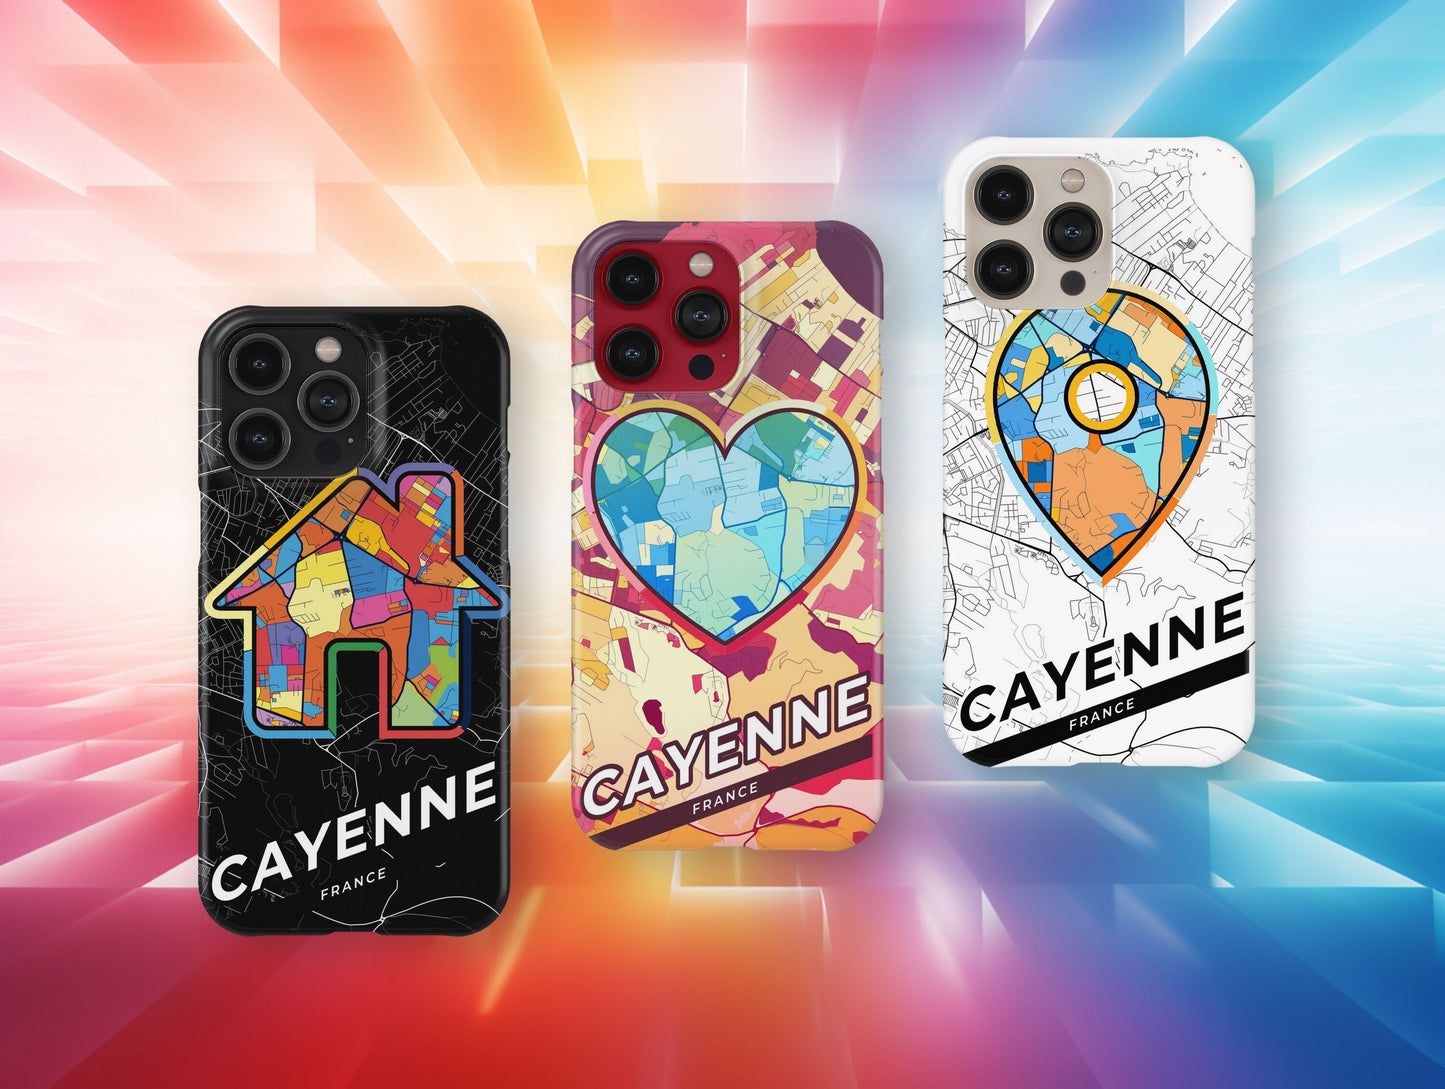 Cayenne France slim phone case with colorful icon. Birthday, wedding or housewarming gift. Couple match cases.